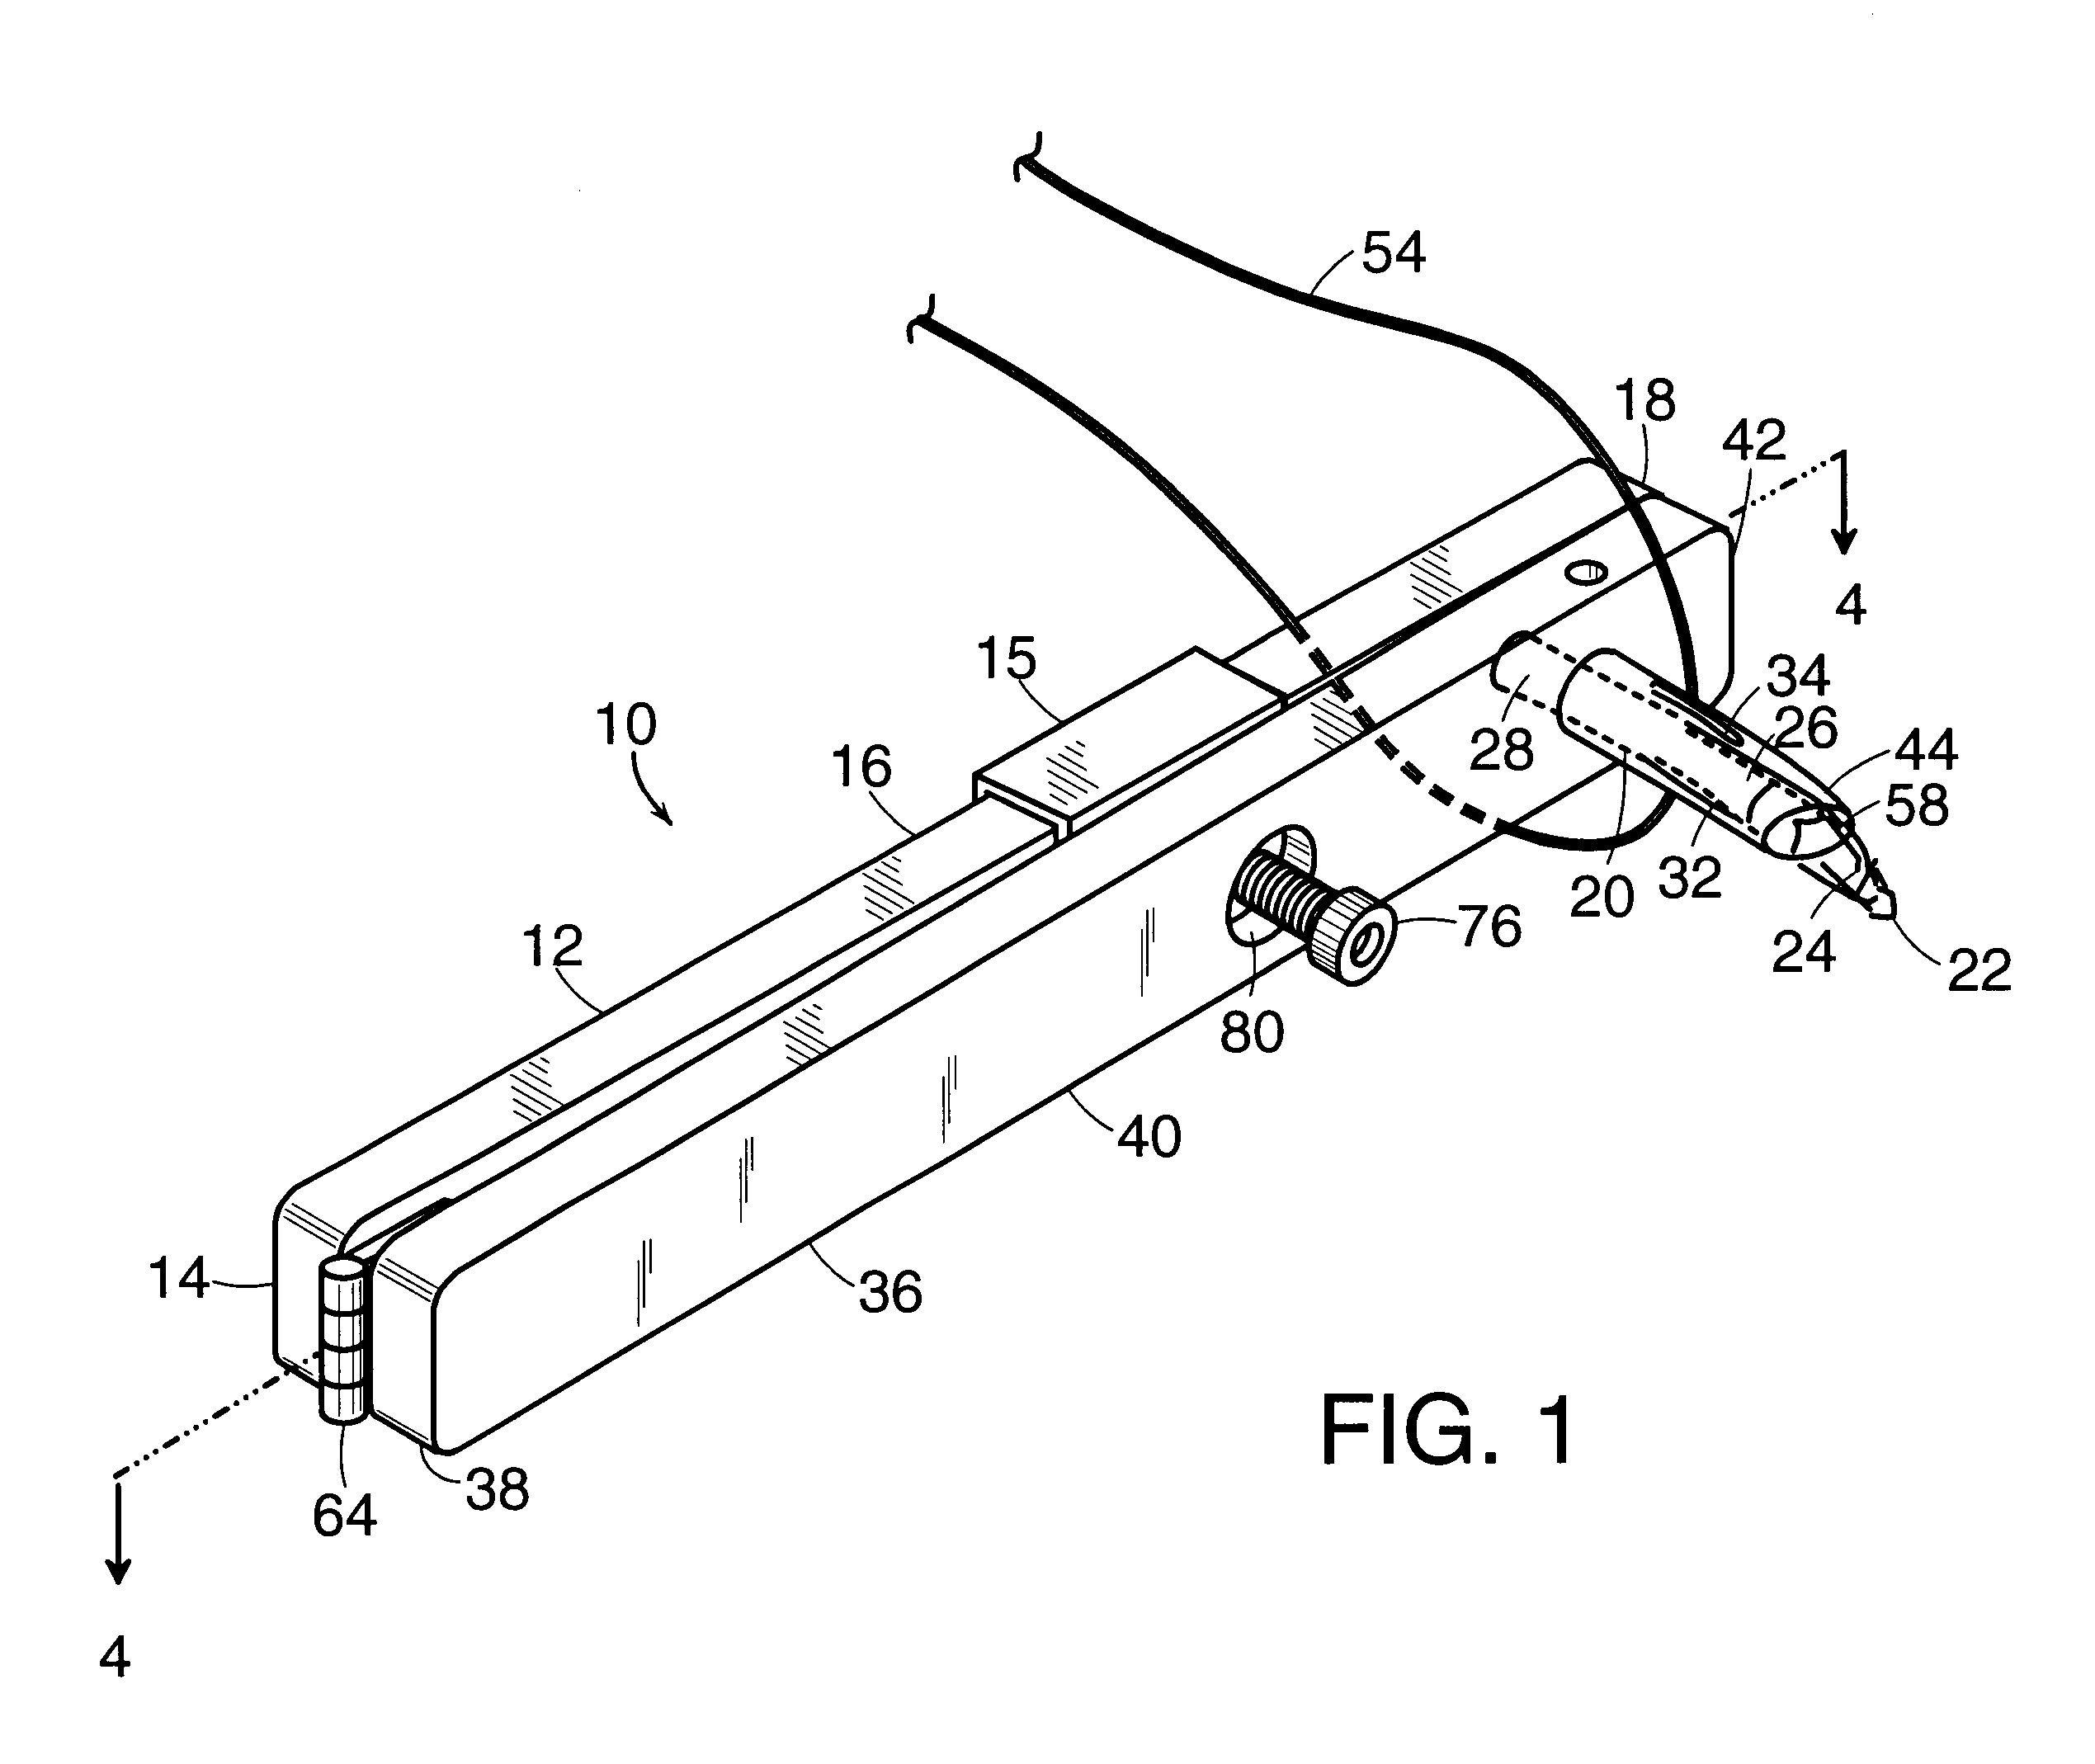 Protective sheath for transvaginal anchor implantation devices